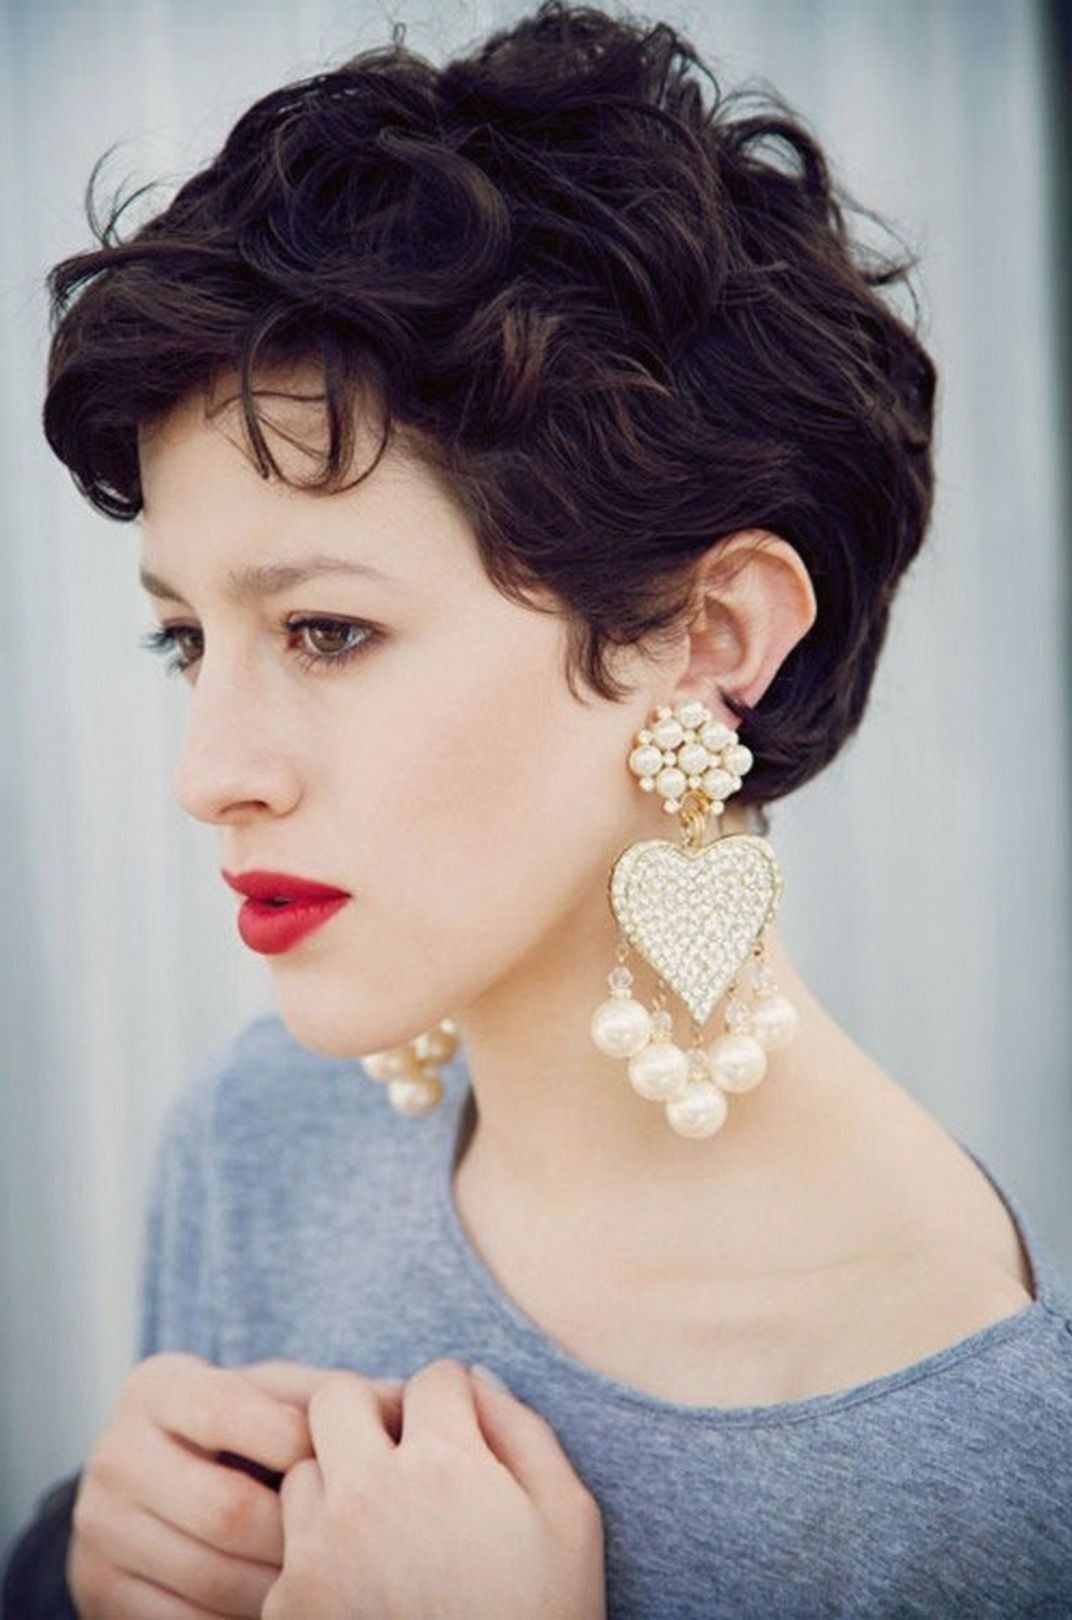 Short Hairstyles : New Short Wavy Pixie Hairstyles Collection In Throughout Recent Short Wavy Pixie Hairstyles (Photo 4 of 15)